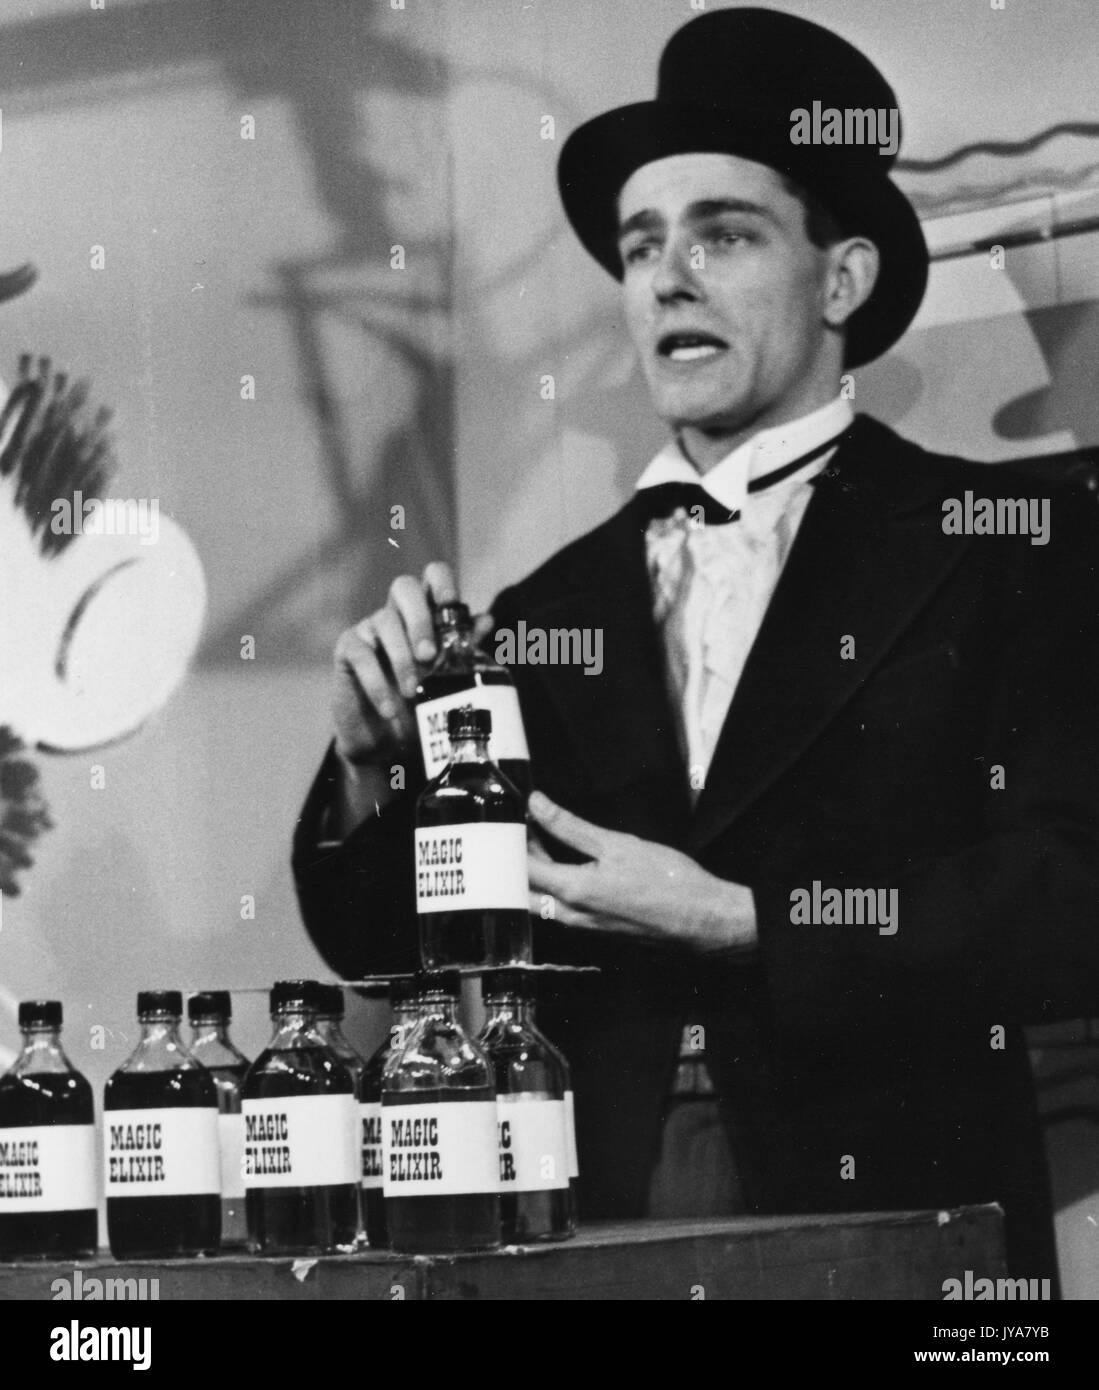 Actor Edmond Levy is on set filming for The Johns Hopkins Science Review, he is wearing a suit, a bow tie, and a black top hat, he is holding a bottle labeled Magic Elixir, he is standing behind a table holding many bottles labeled Magic Elixir, 1955. Stock Photo